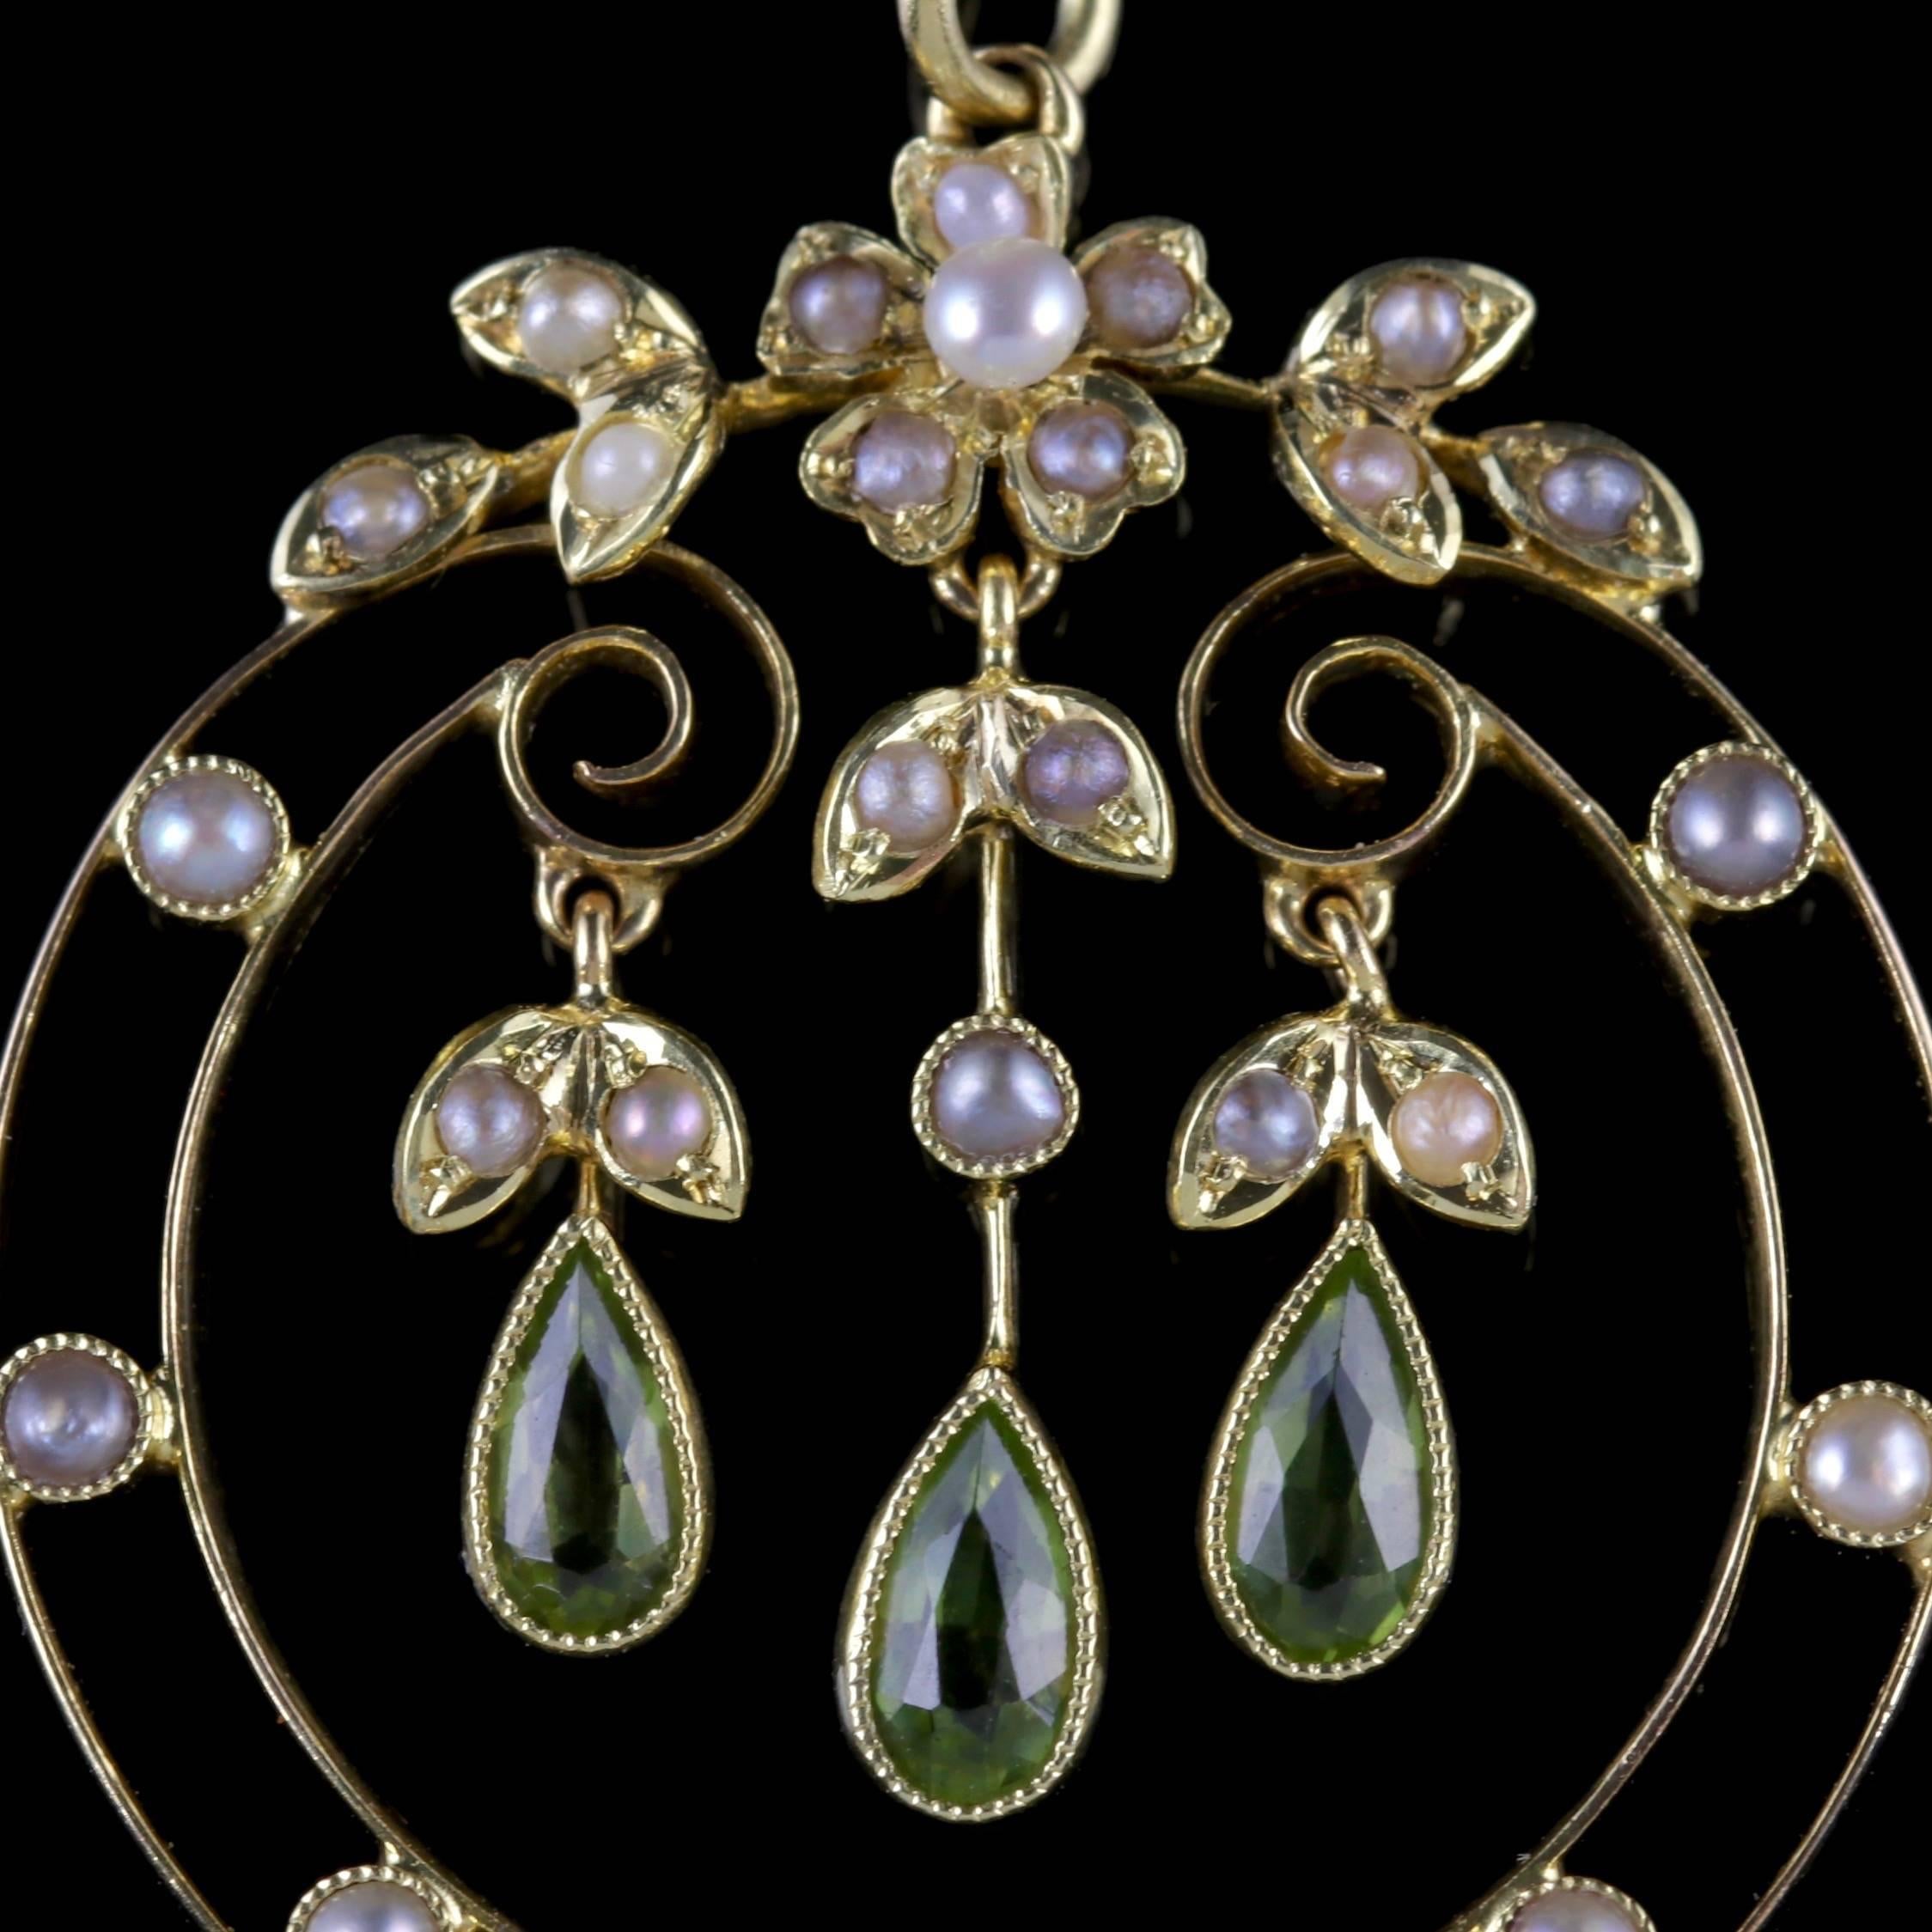 To read more please click continue reading below-

This fabulous antique Victorian pendant was made representing the Suffragette movement, Circa 1900. 

Suffragettes liked to be depicted as feminine, their jewellery popularly consisted of Violet,